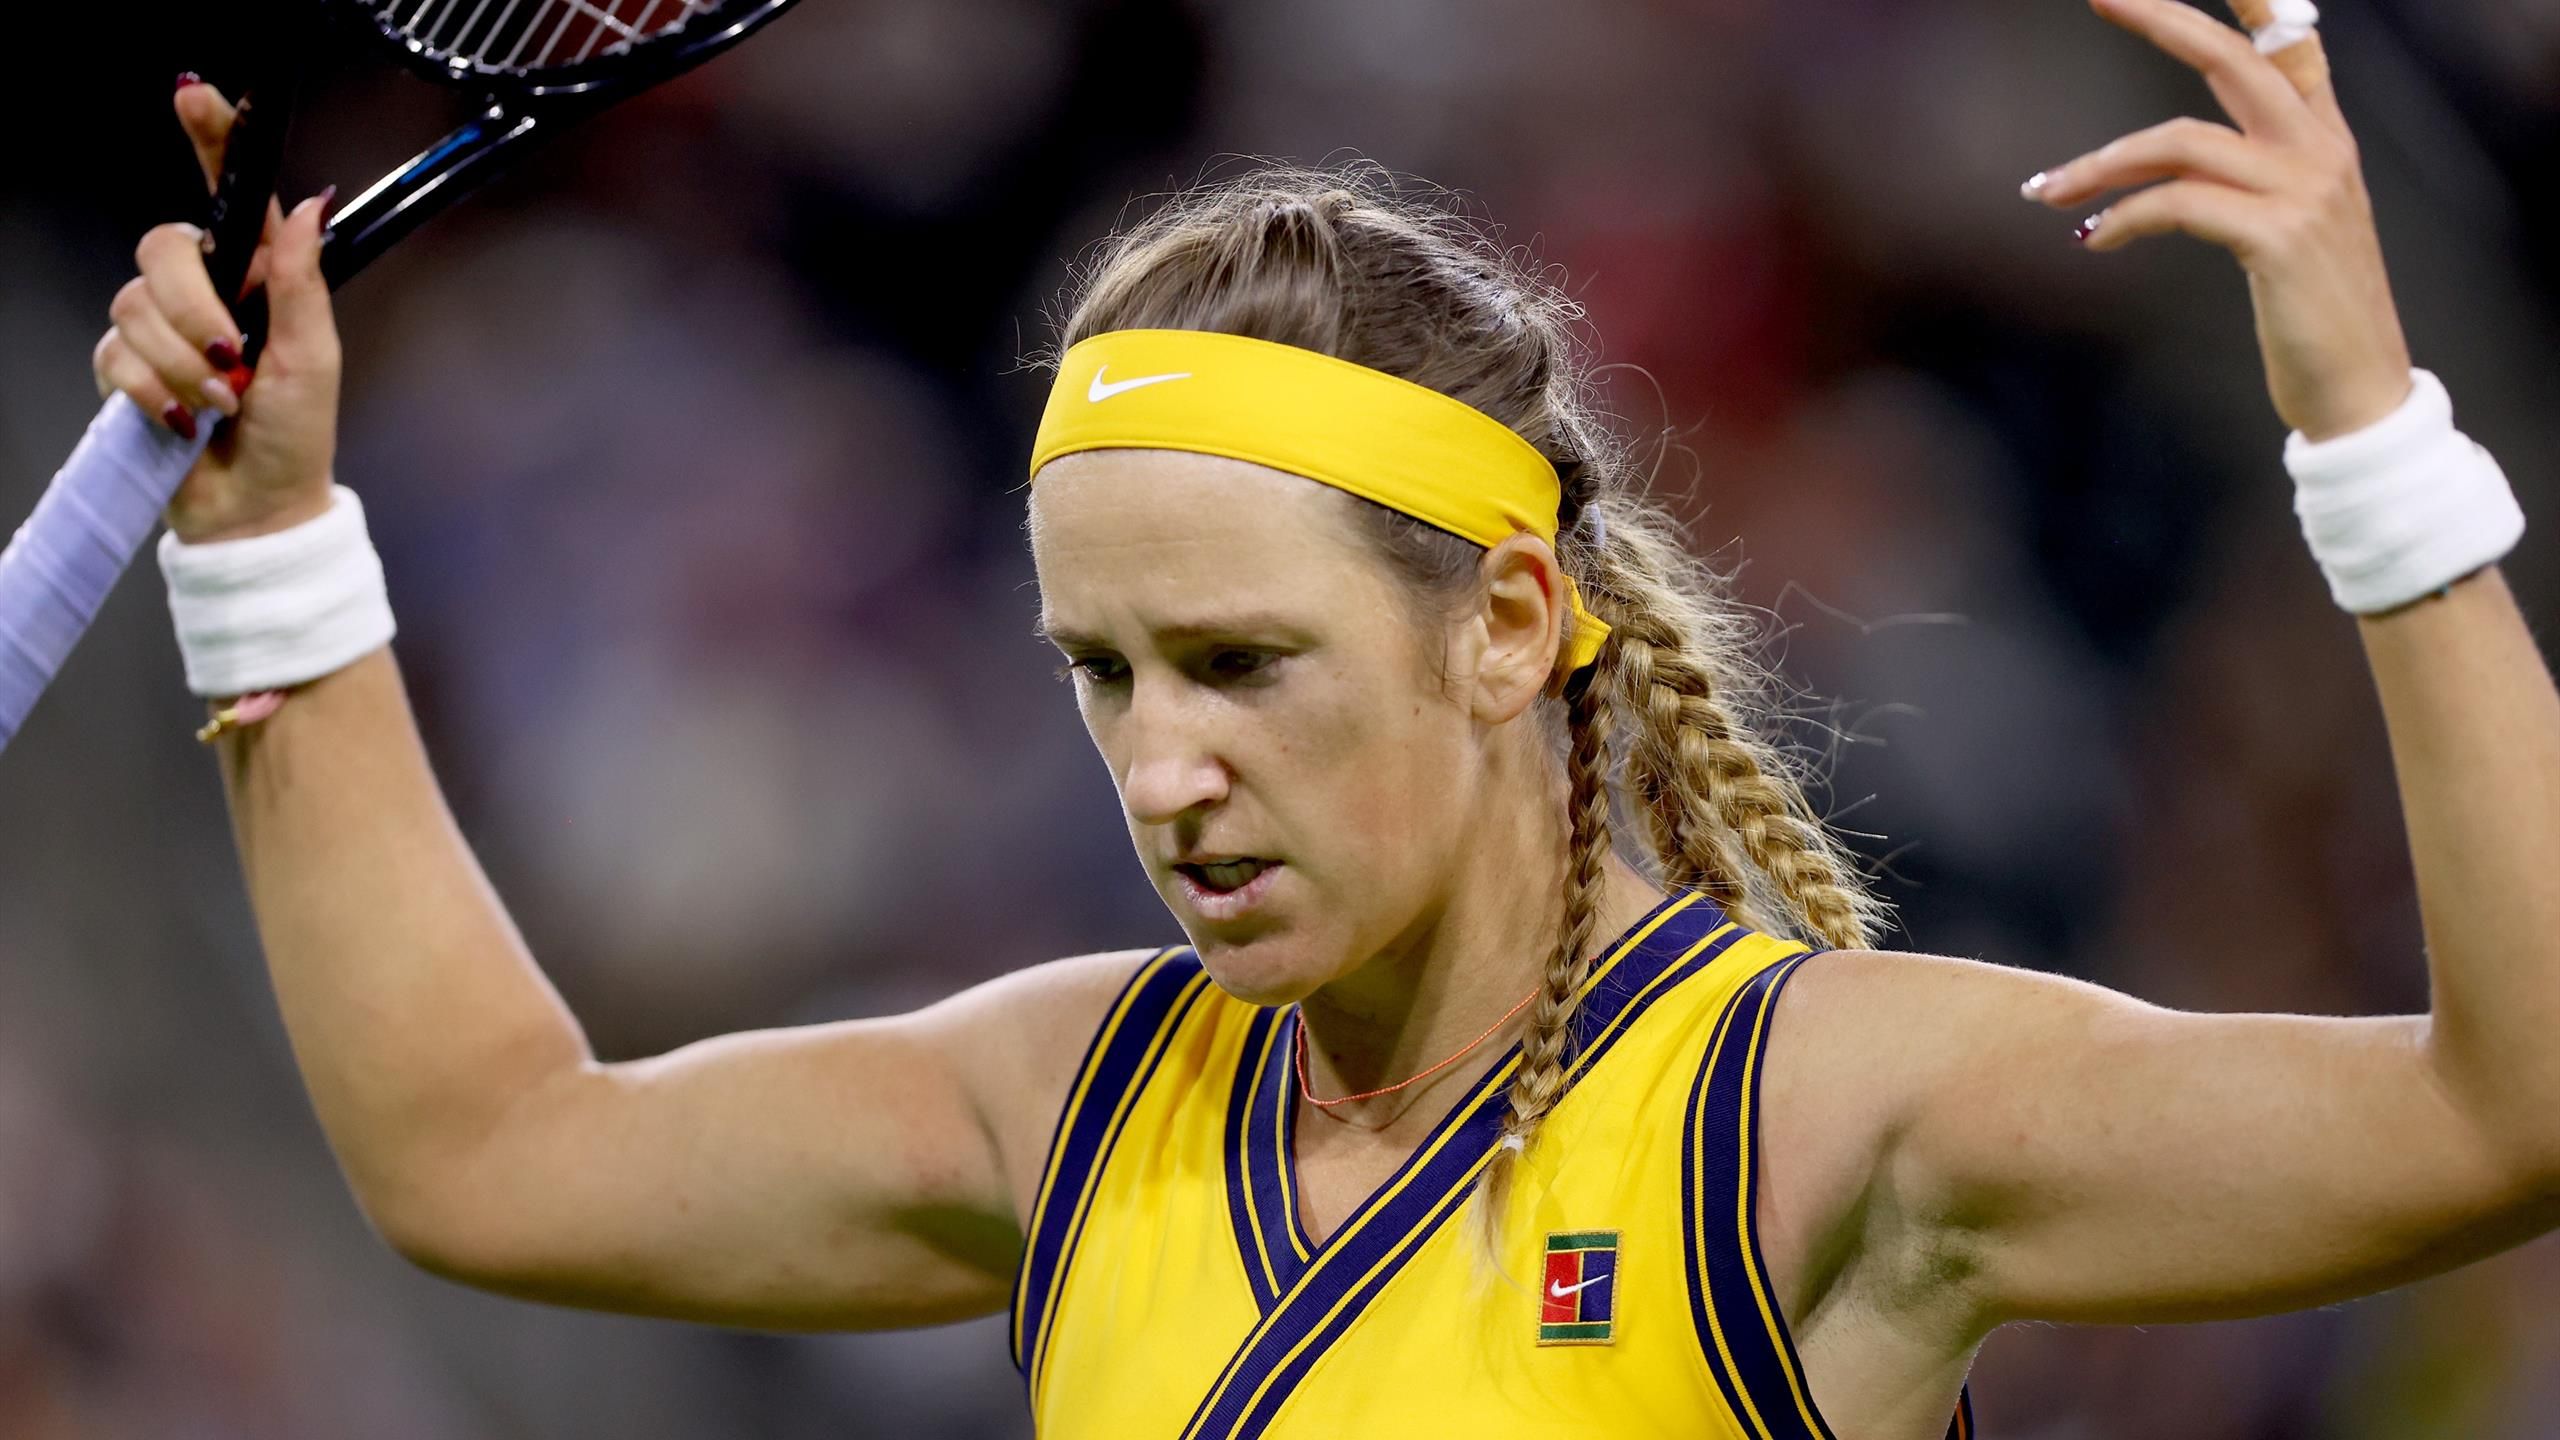 Victoria Azarenka devastated by Russian invasion of Ukraine, calls for peace and end to war